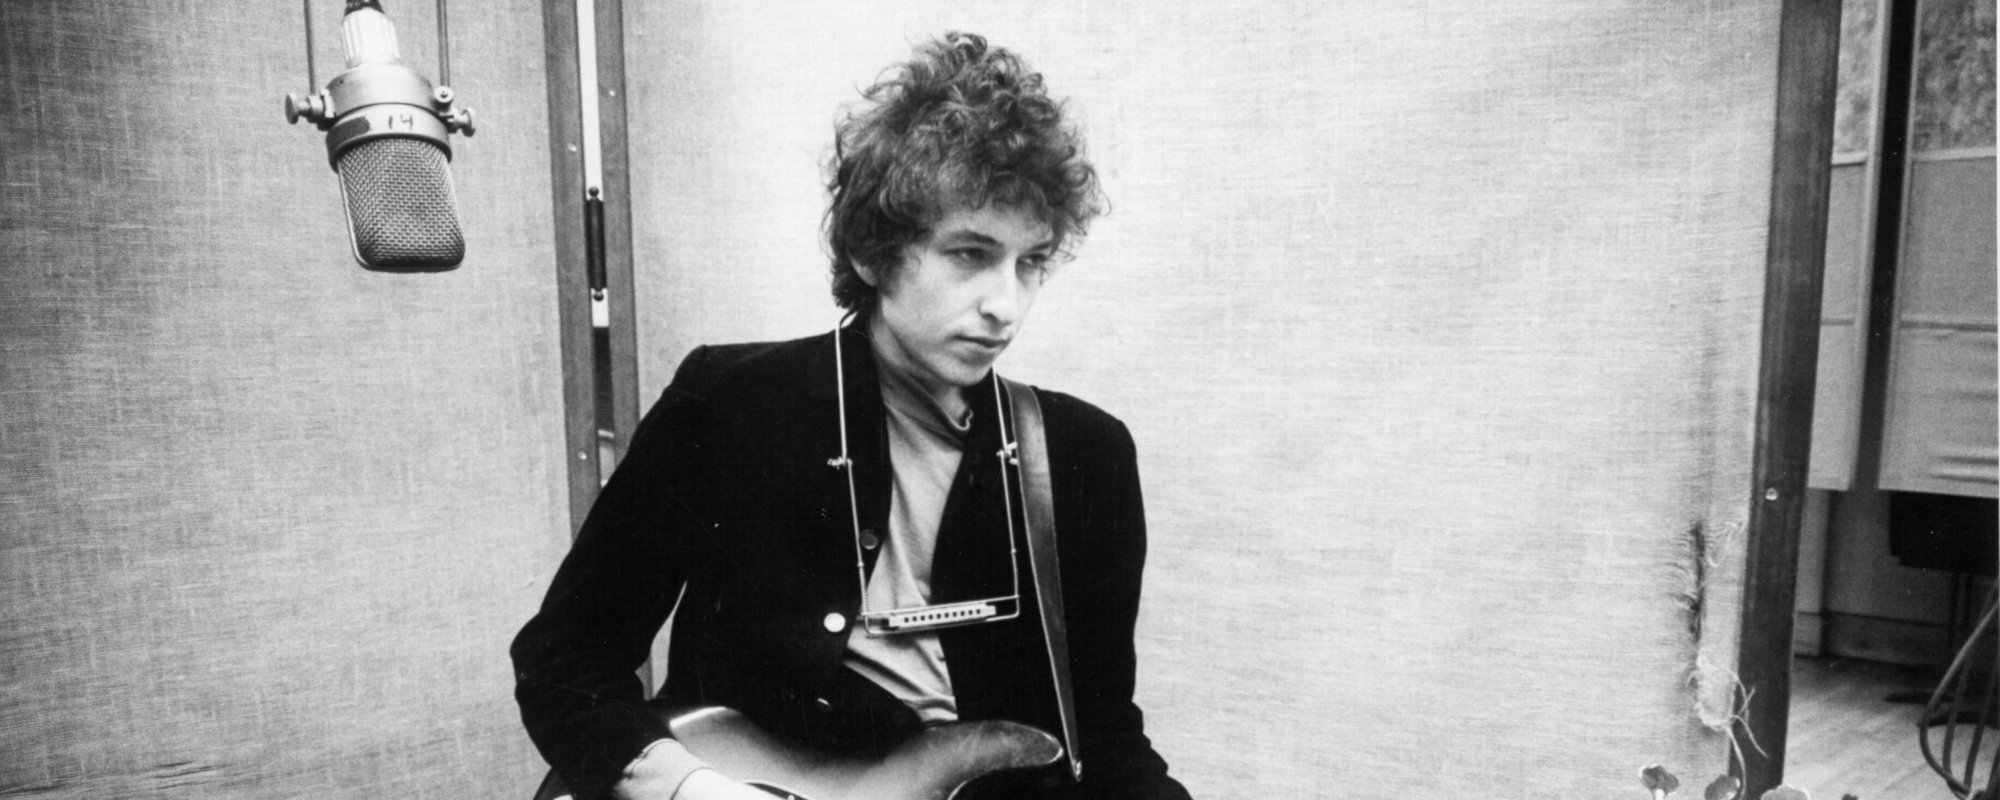 The real meaning behind Bob Dylan’s timeless protest song